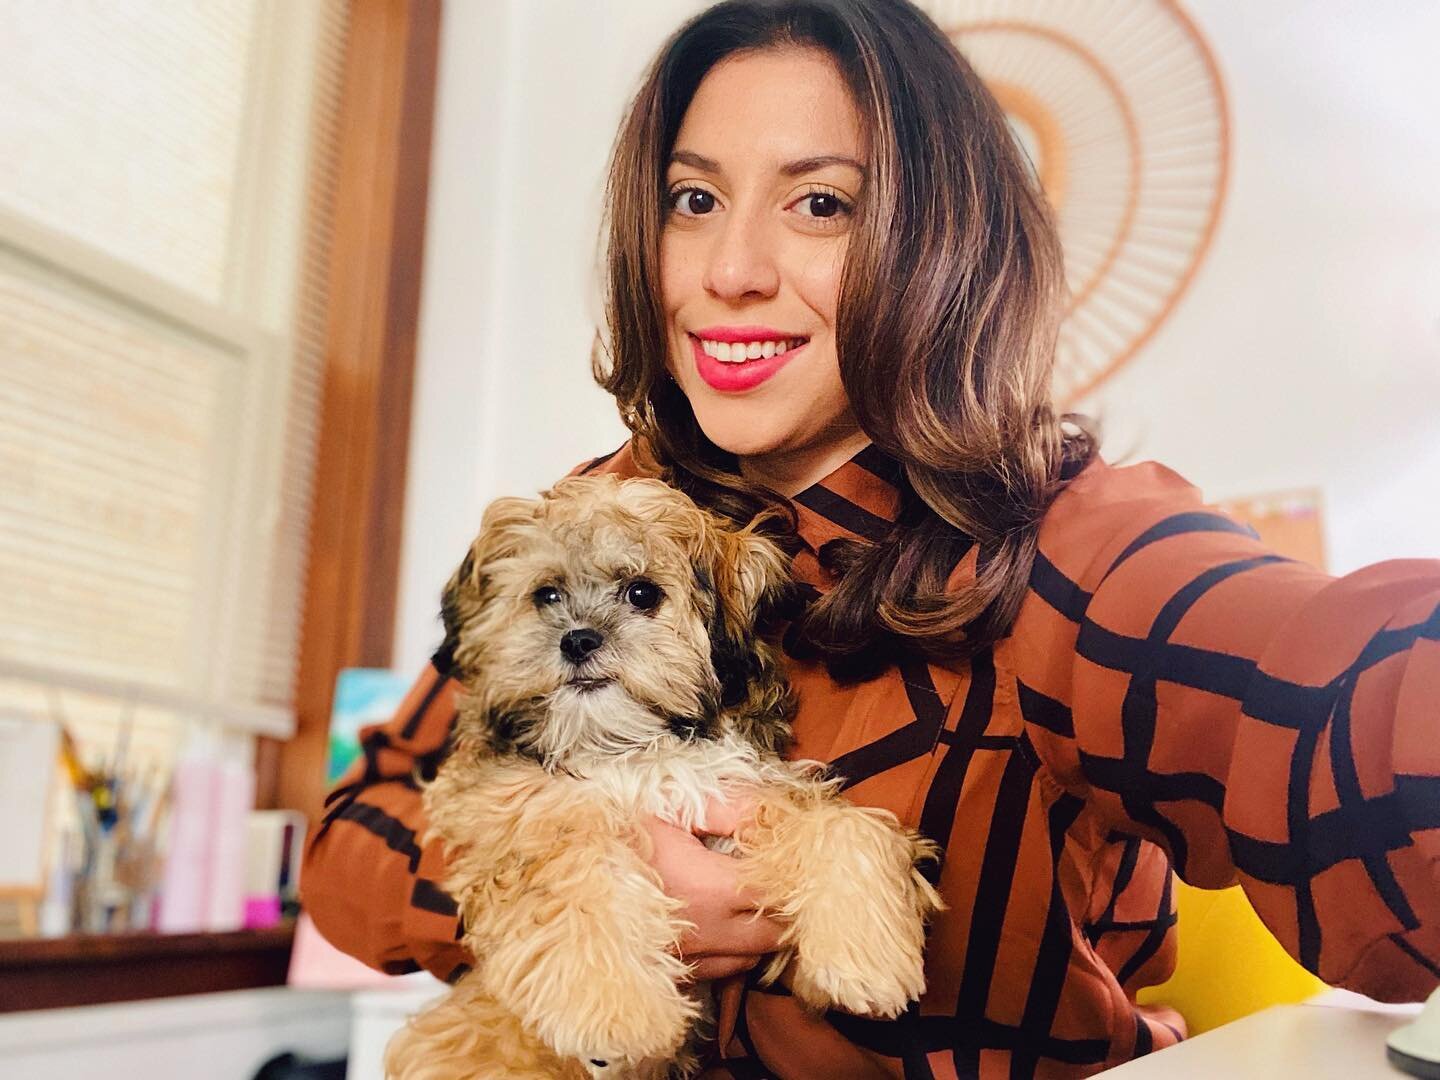 My favorite part of returning home from any trip 🐶 🥰@diego_krimp  #roommate #furry 
.
.
.
.
.
#healreadyneedsahaircut #puppy #wickerparkpup #coworkers #shitzupoodle #shitzu